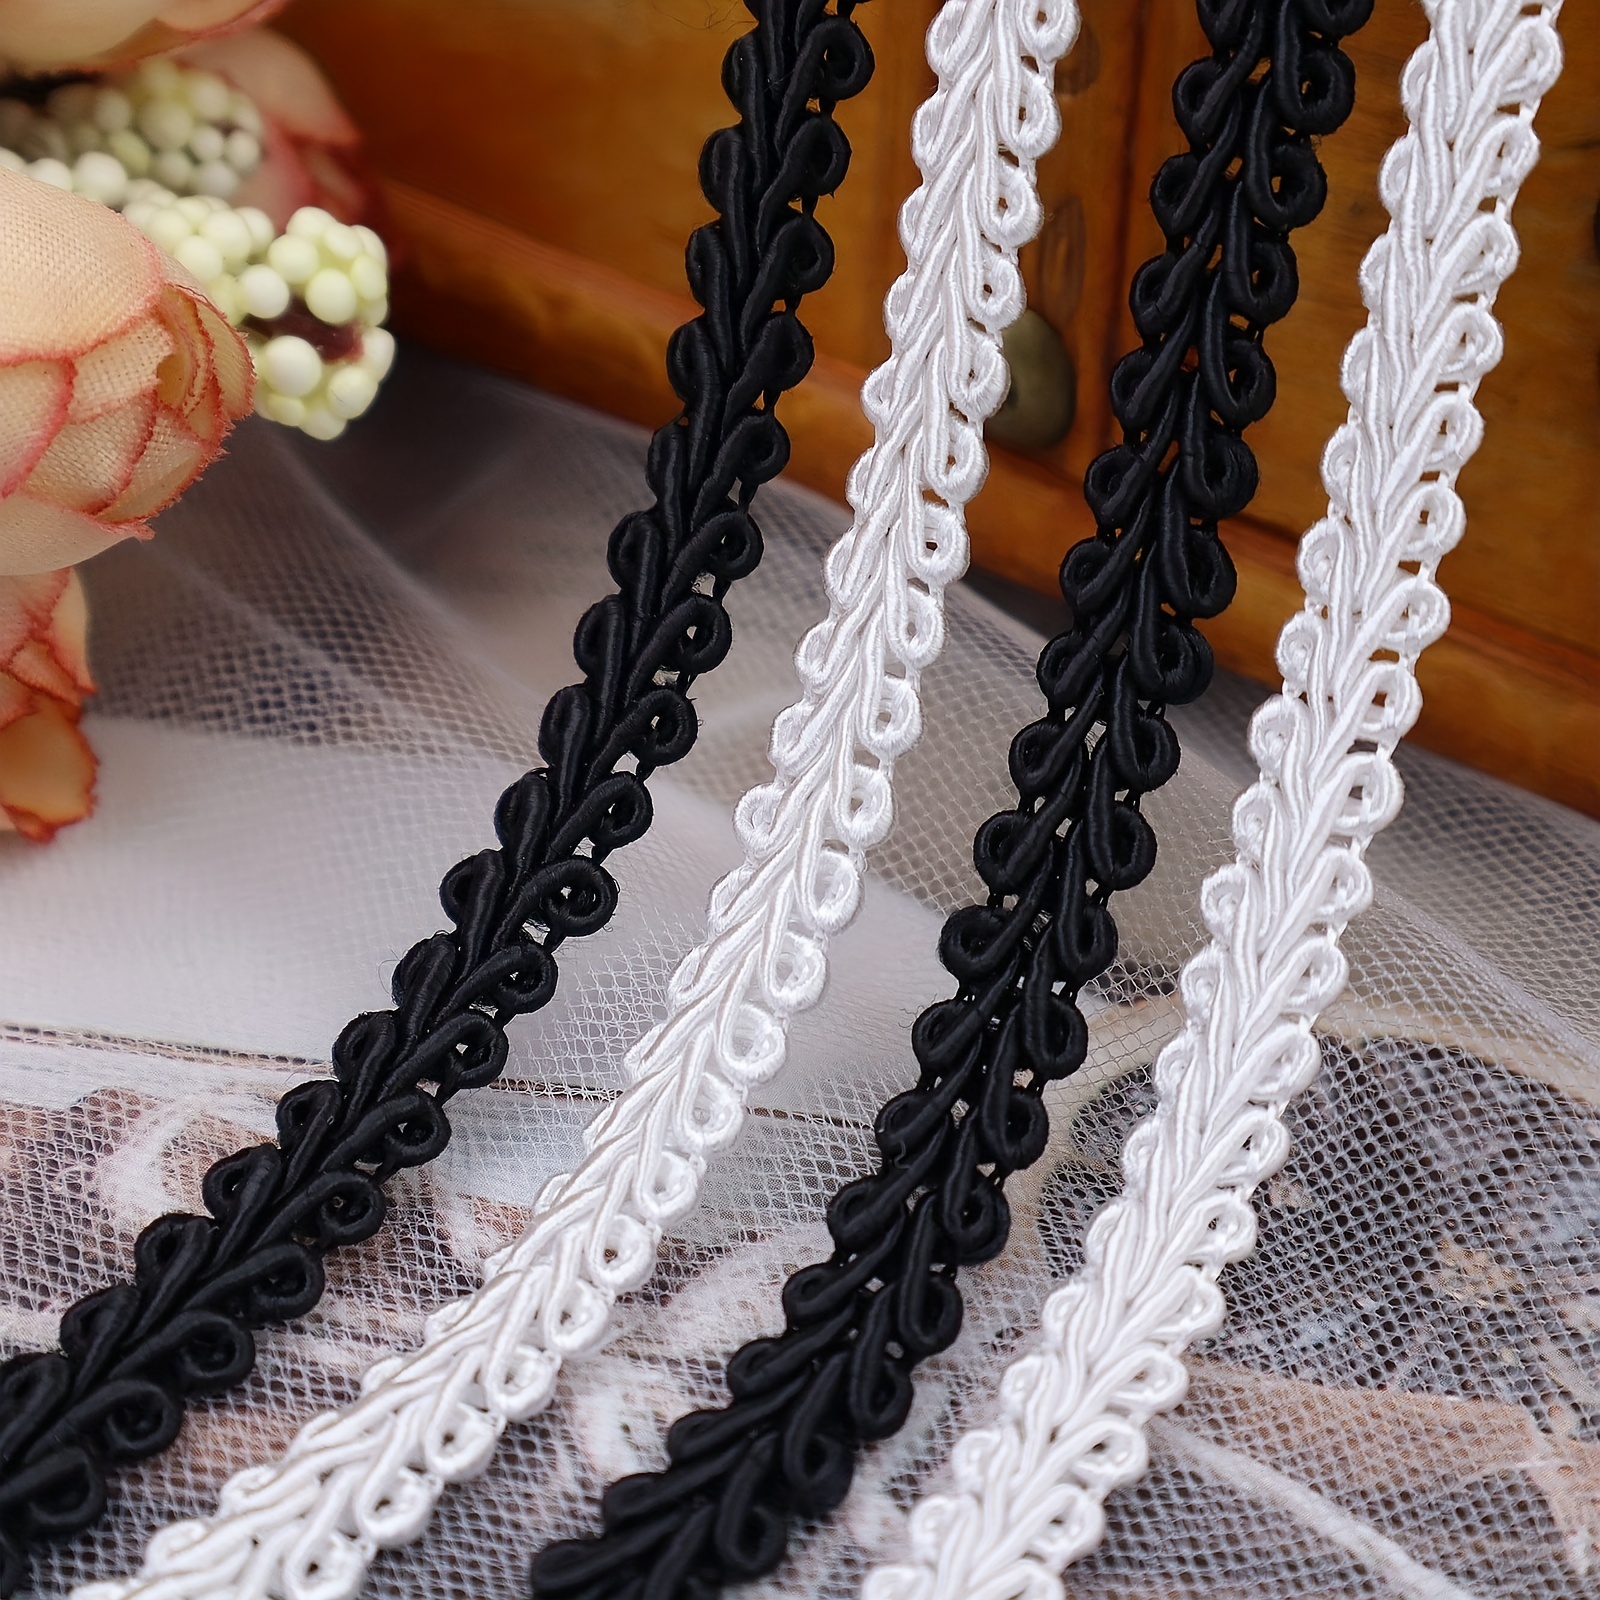 2 STYLES / MAJESTIC 2 Wide Tape Gimp Braid Trim / Drapery, Upholstery,  Pillows, Home Decor / by the Yard 